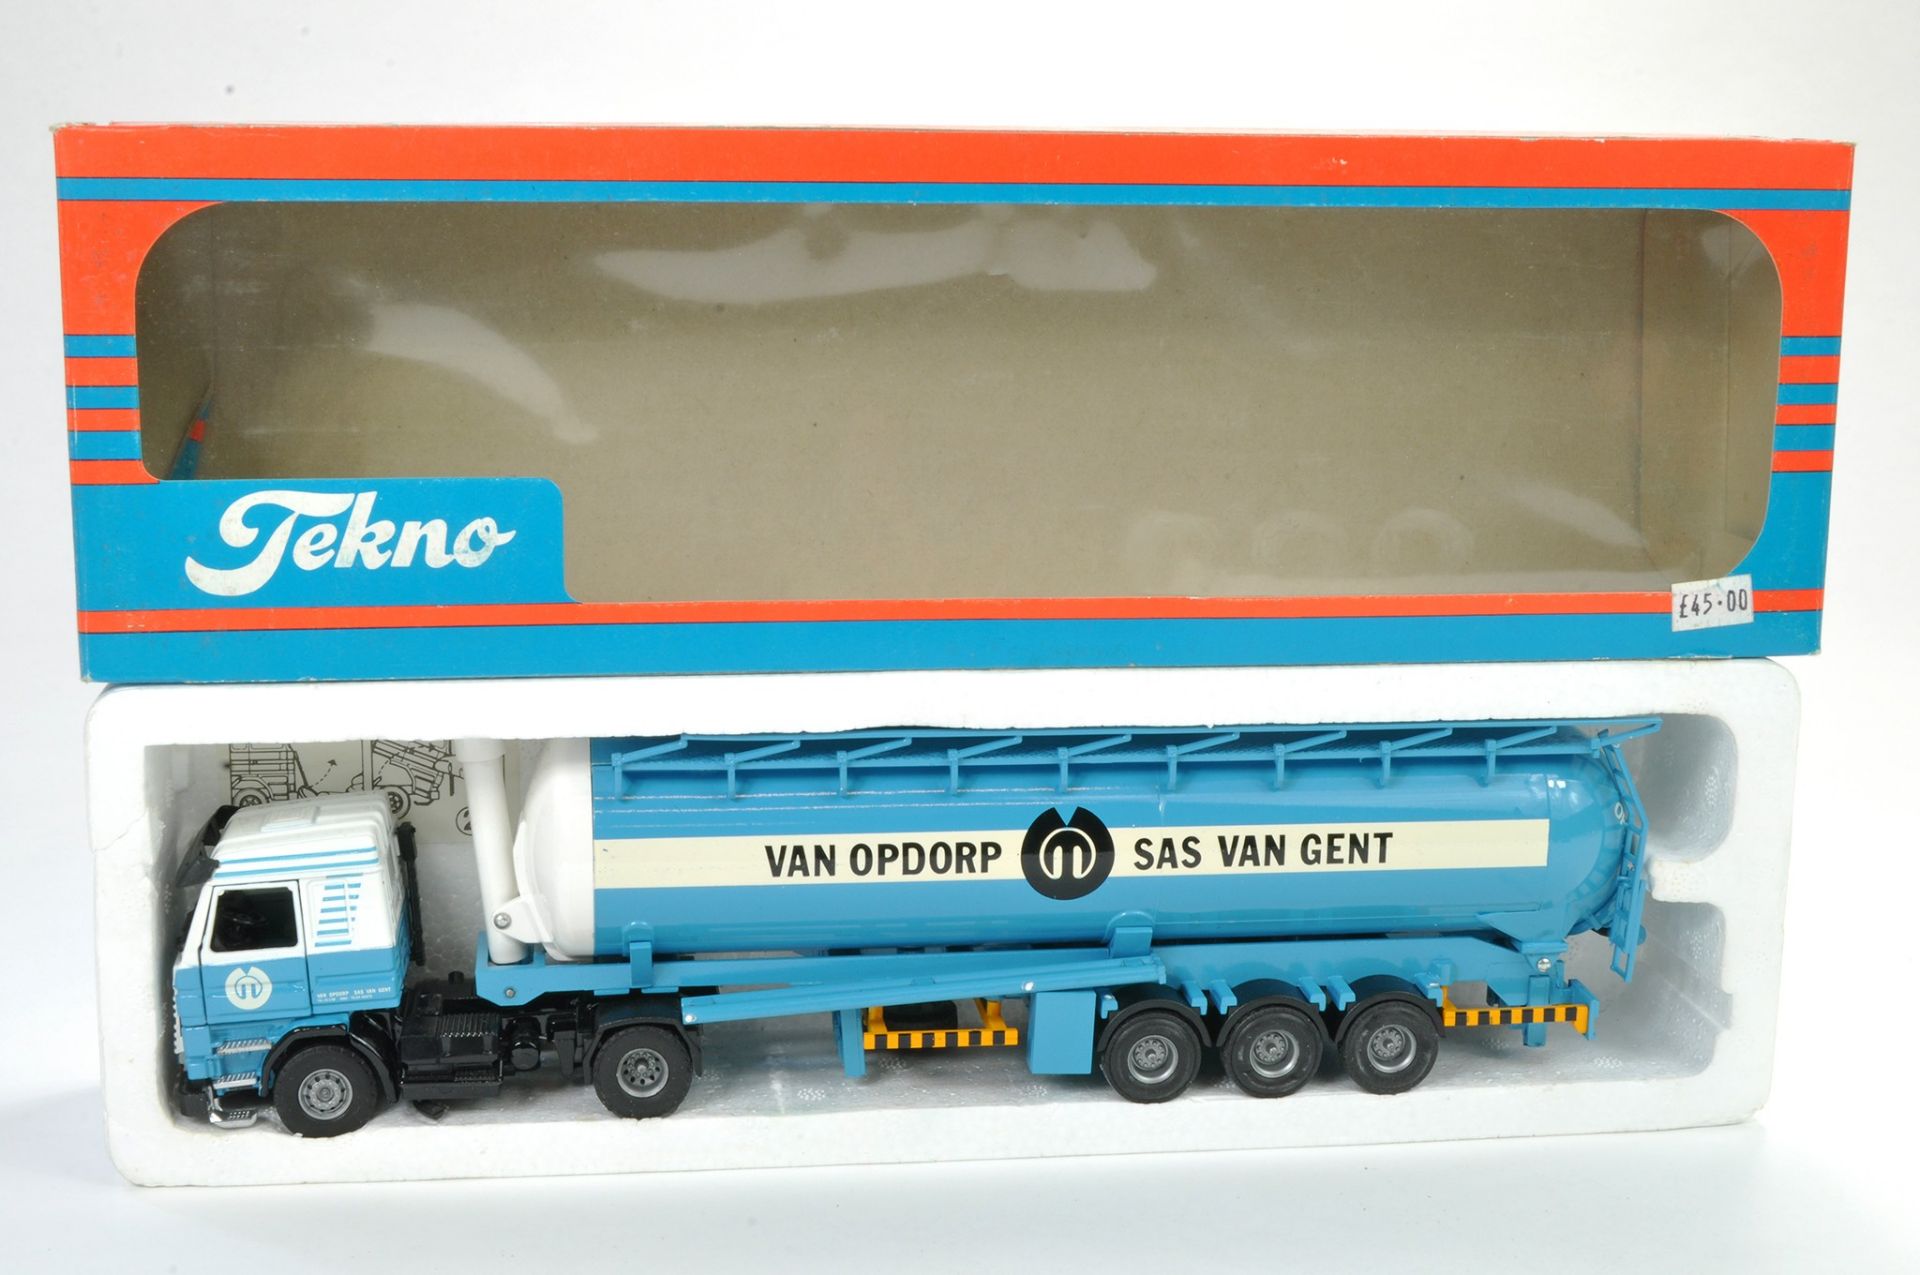 Tekno 1/50 Model Truck issue comprising Volvo Tanker in the livery of Van Opdorp. Appears